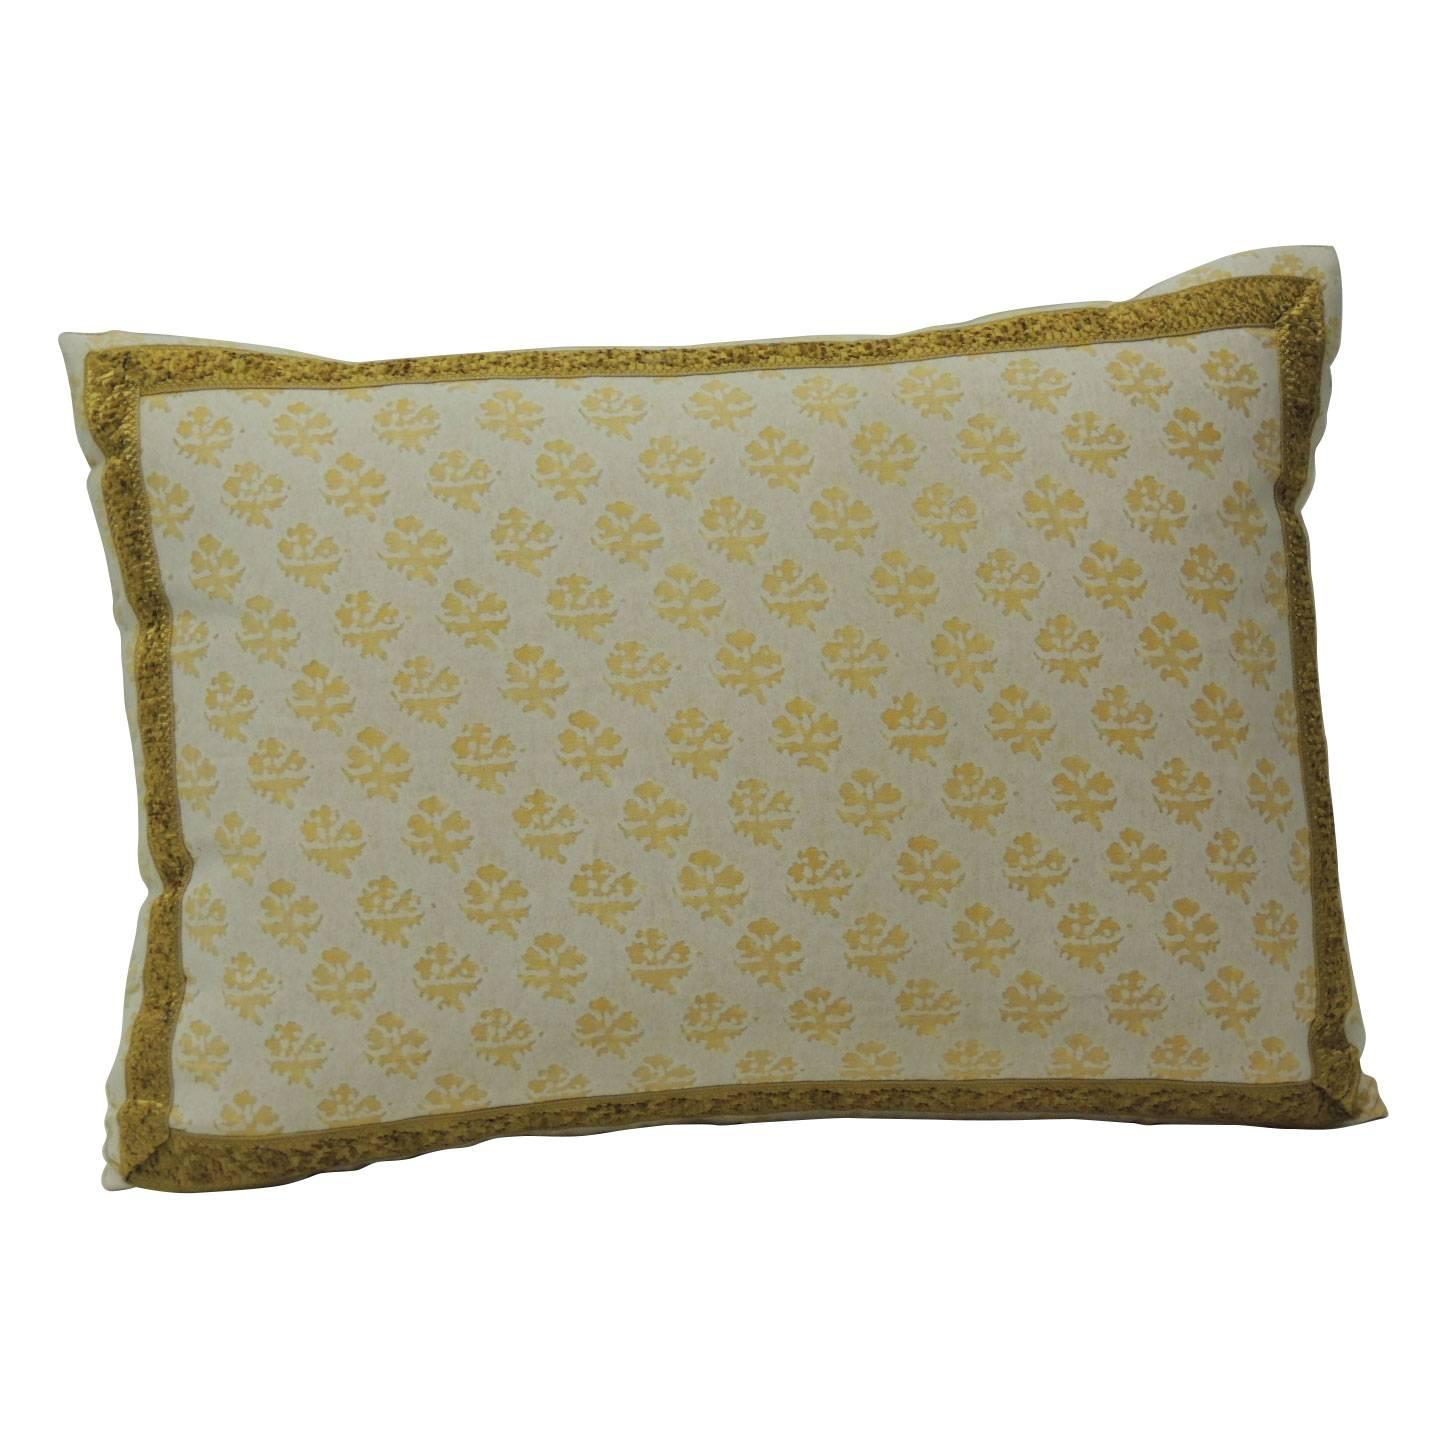  Yellow Fortuny "Persiano" Citron on White Pillow